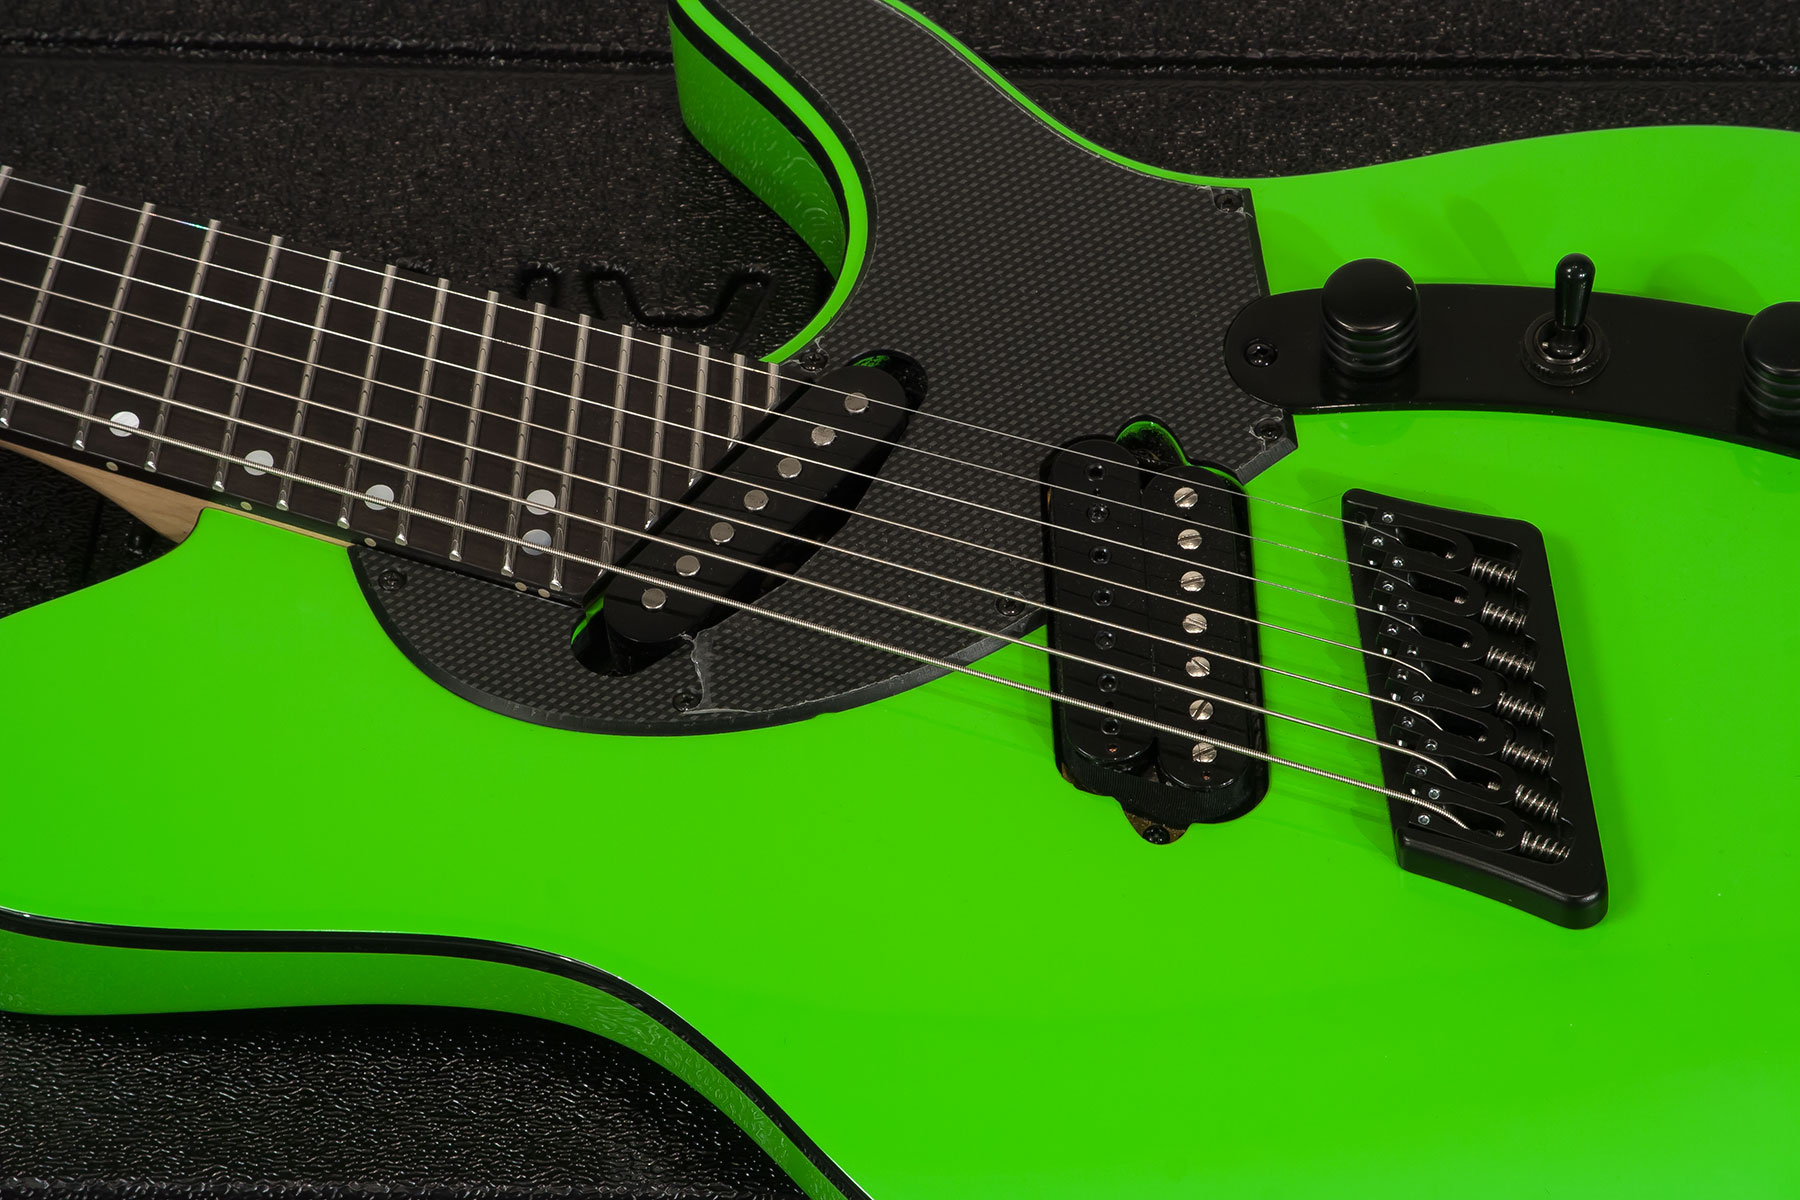 Ormsby Tx Gtr 7 Hs Ht Eb - Chernobyl Green - Multi-Scale Guitar - Variation 2